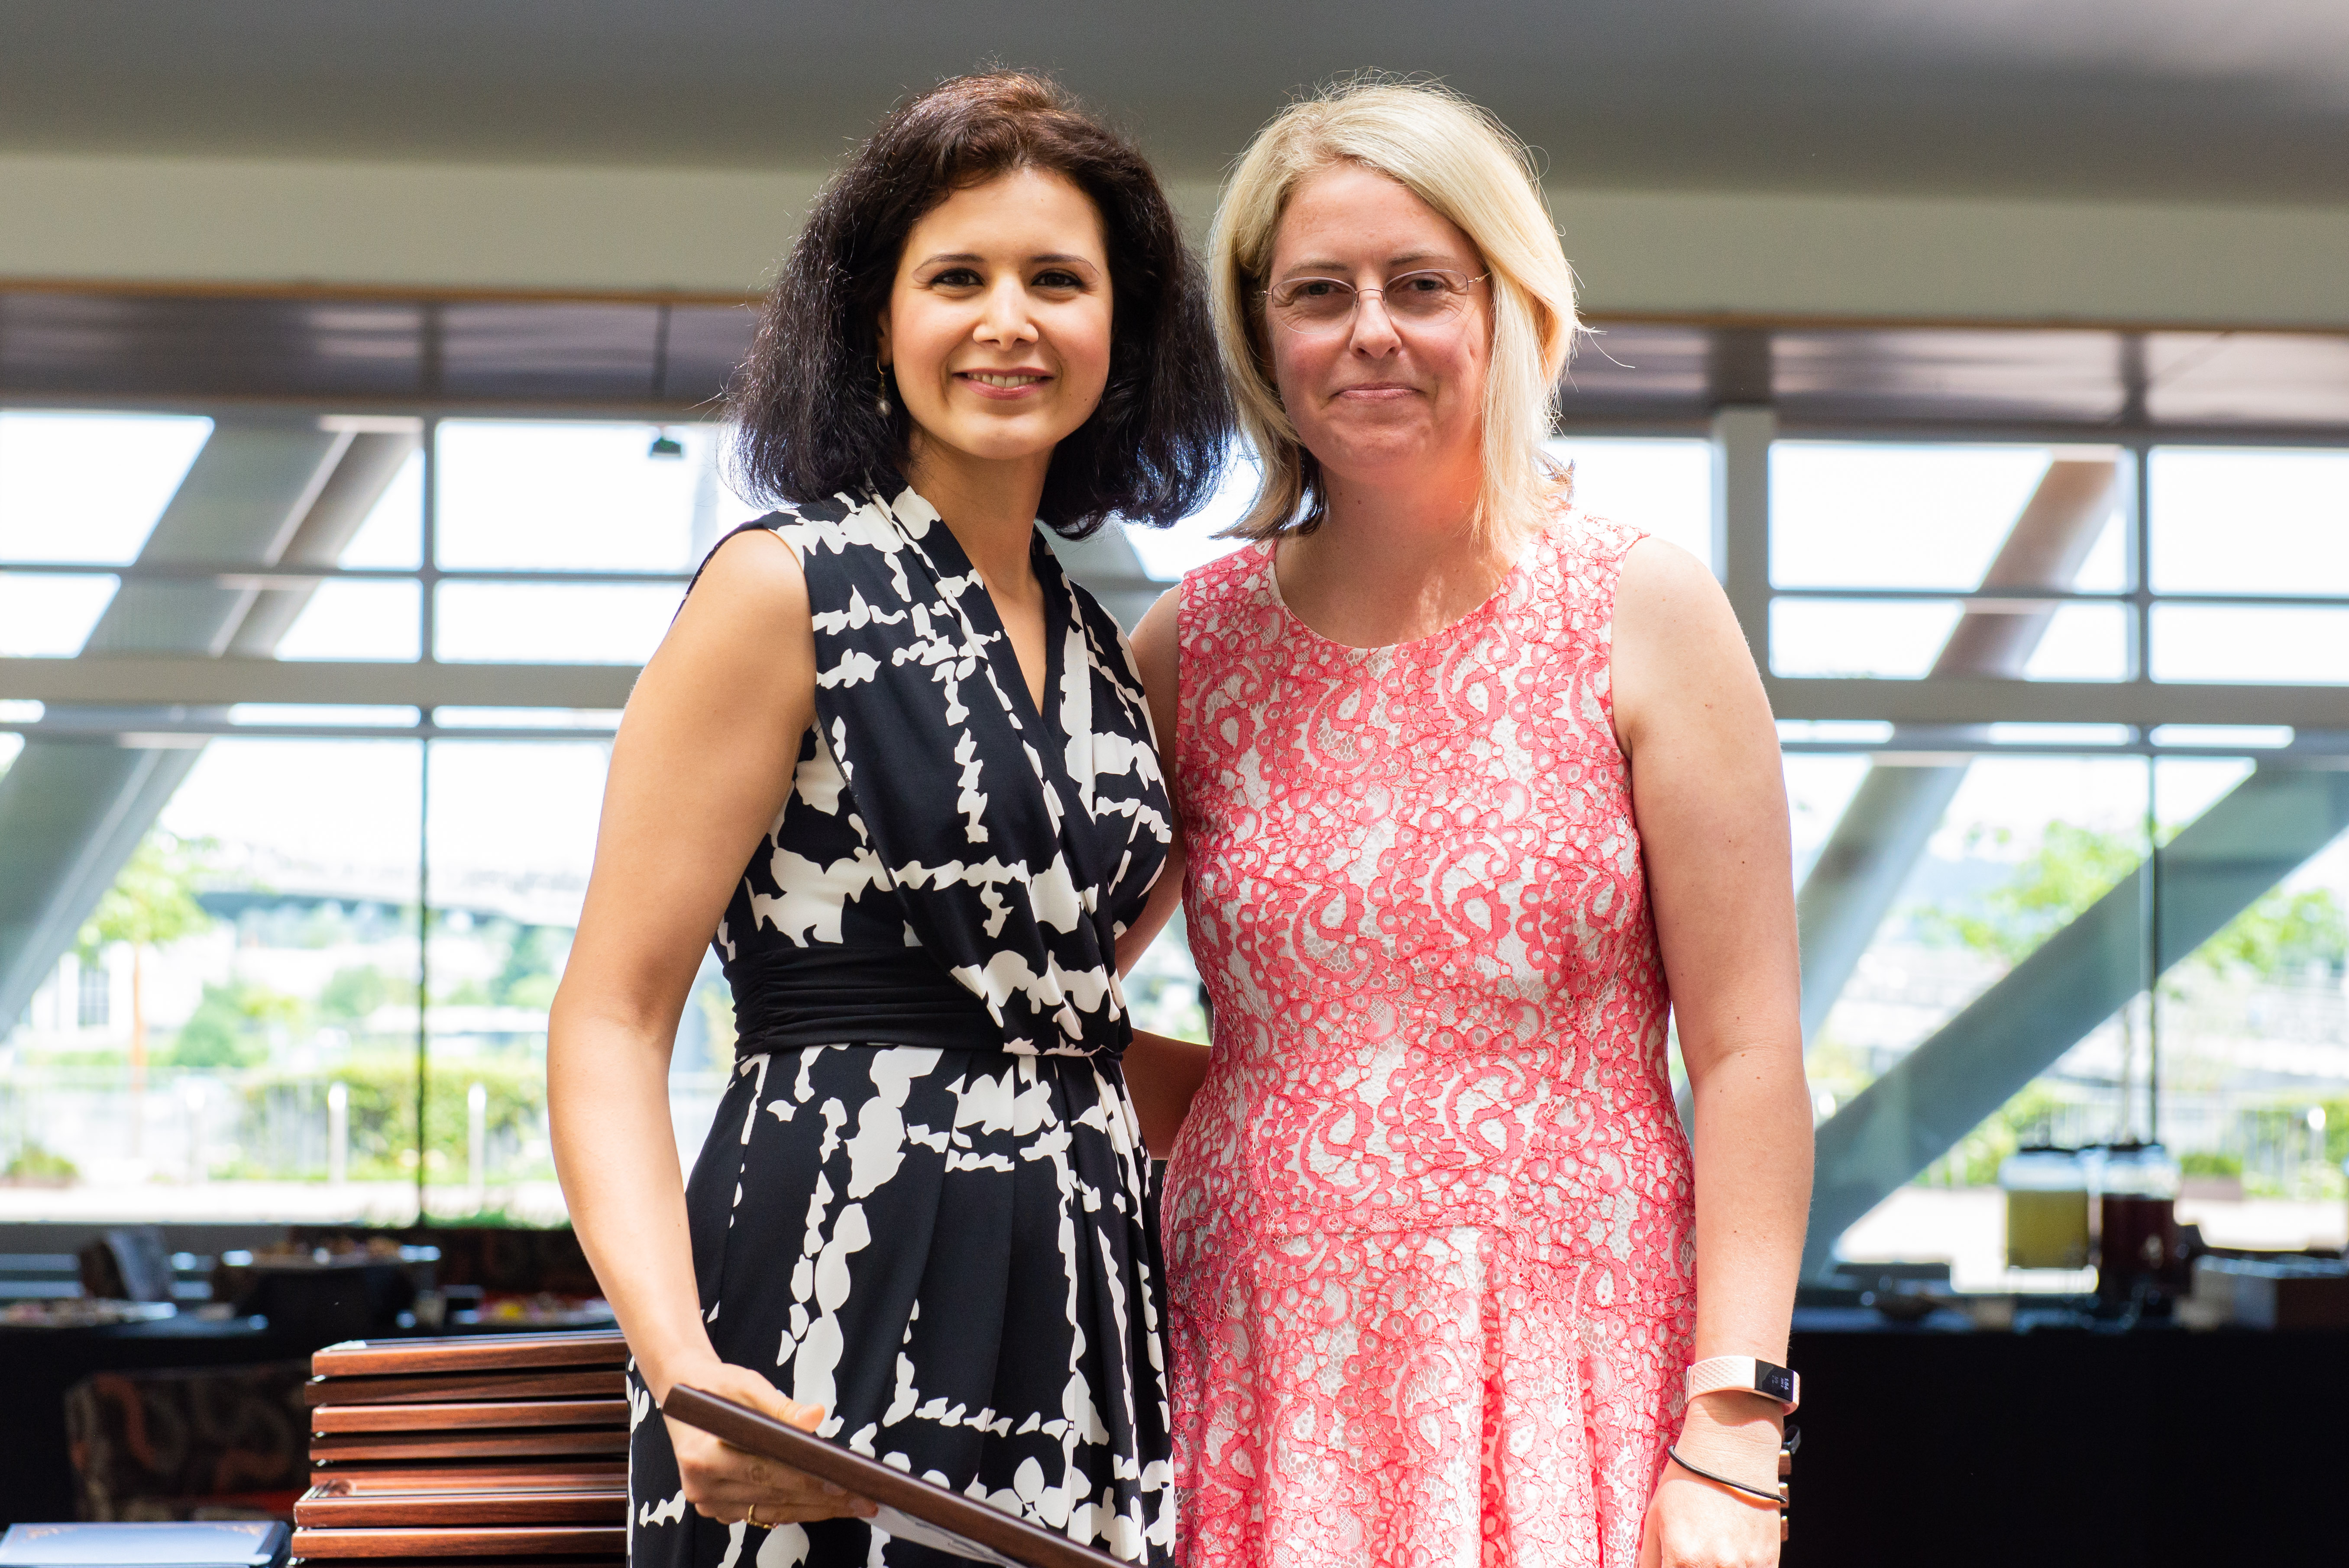 SOM Honors and Awards 2019 - Dr. Tracy Bumsted with Delaram Safarpour, M.D., assistant professor of neurology